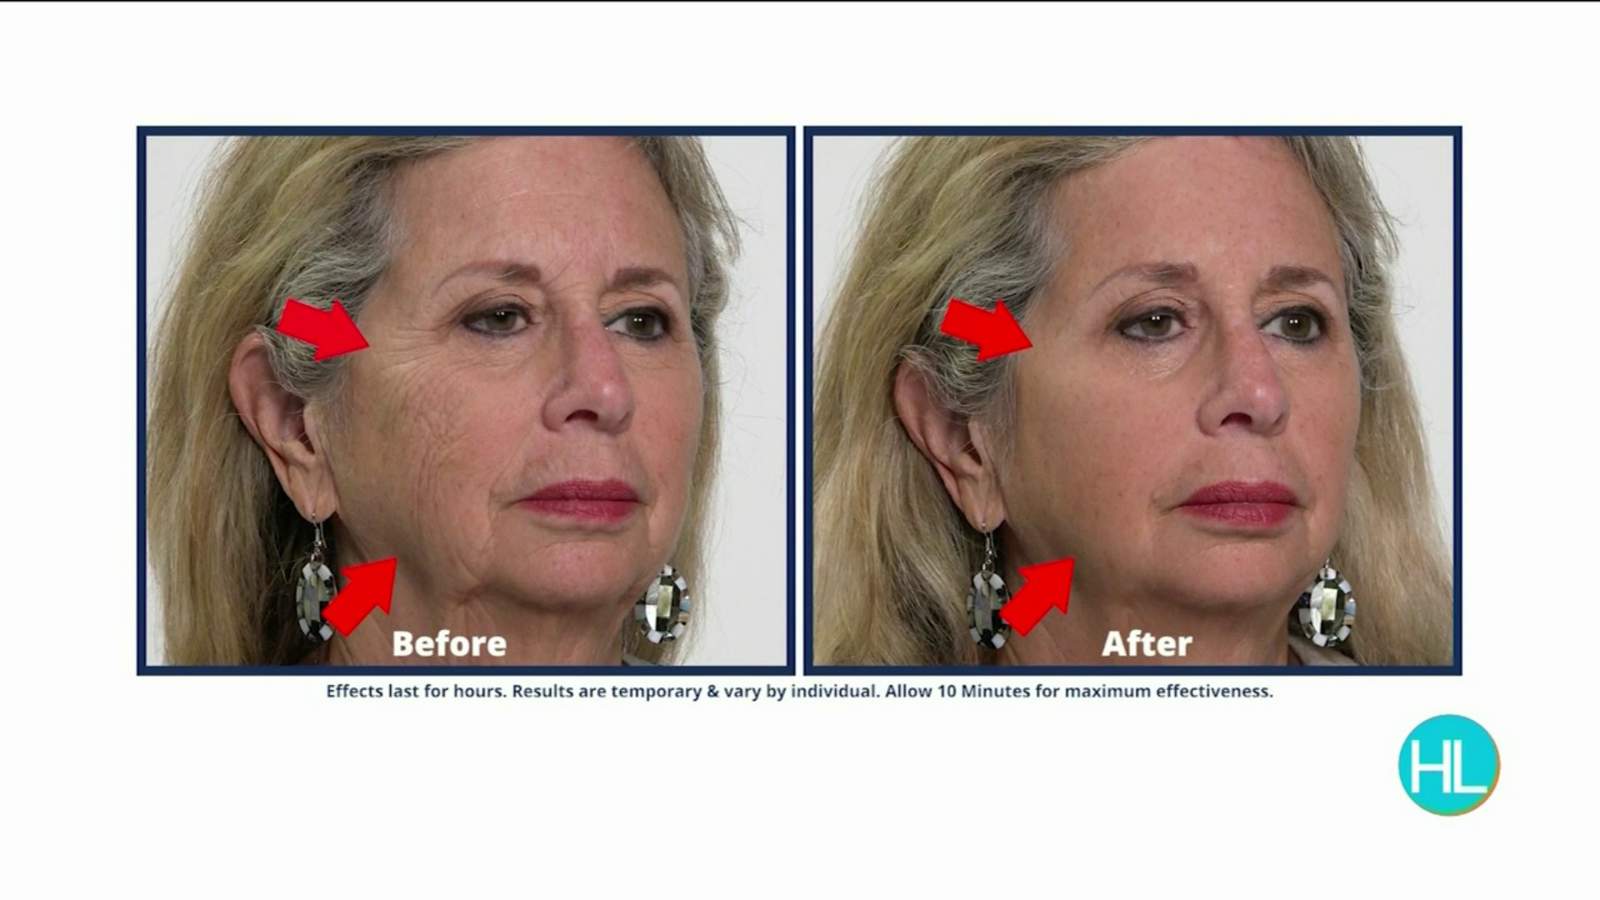 Reduce the appearance of lines and wrinkles with this one product